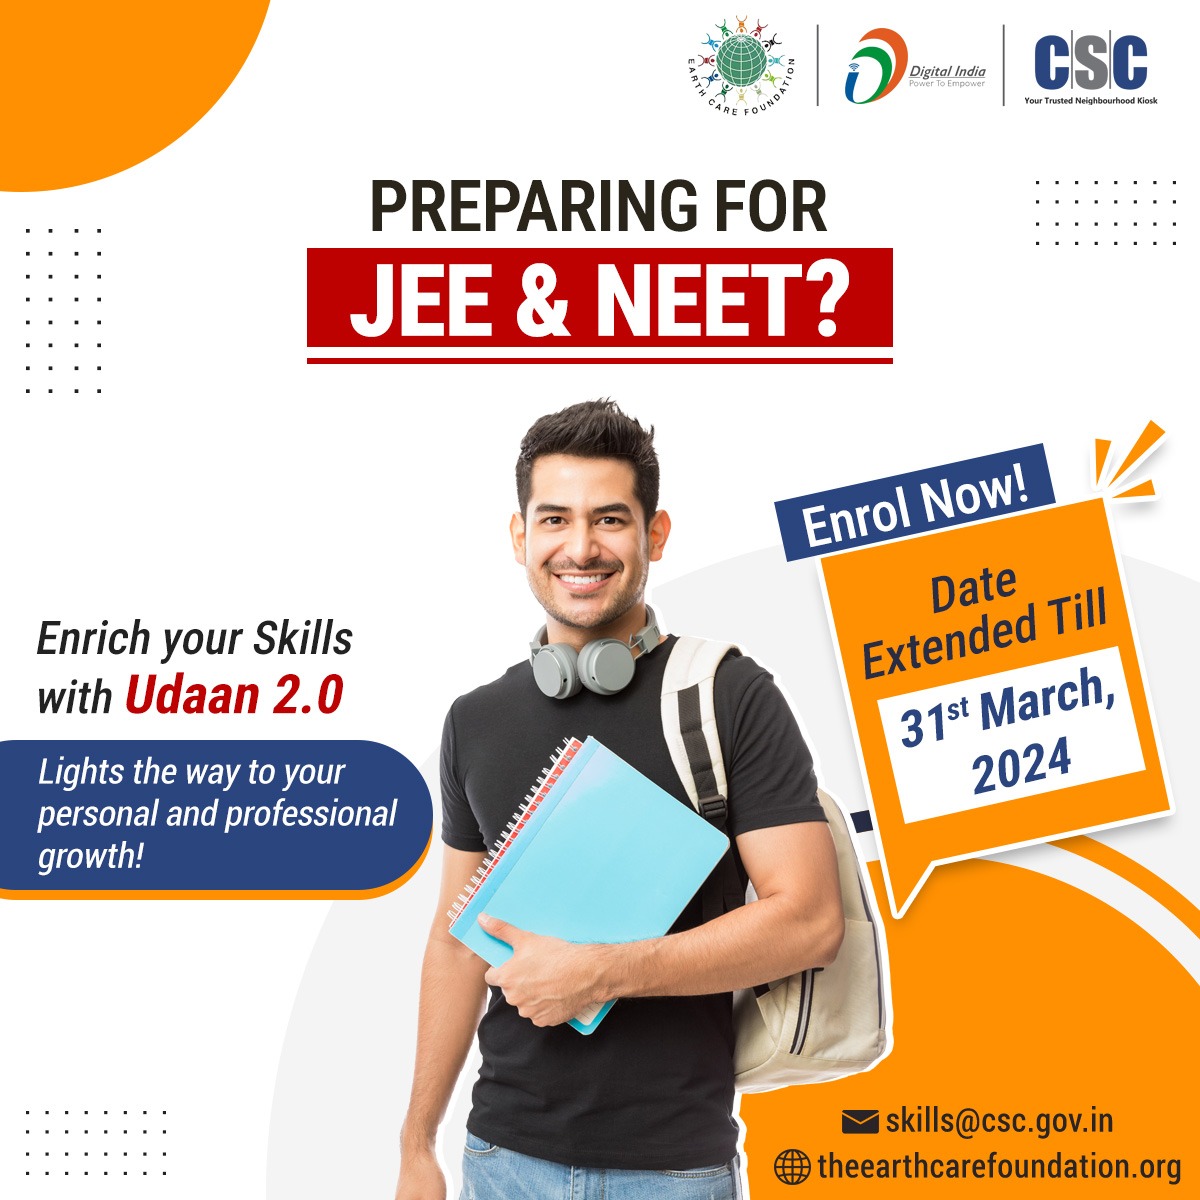 Preparing for JEE & NEET?? Enrol now & Boost your #JEE/#NEET preparations with Udaan 2.0!! Registration Date Extended: 31st March, 2024 For more information, write us on skills@csc.gov.in #CSC #DigitalIndia #CSCAcademy #DigitalInclusion #CSCEducationServices @naveensharmacsc